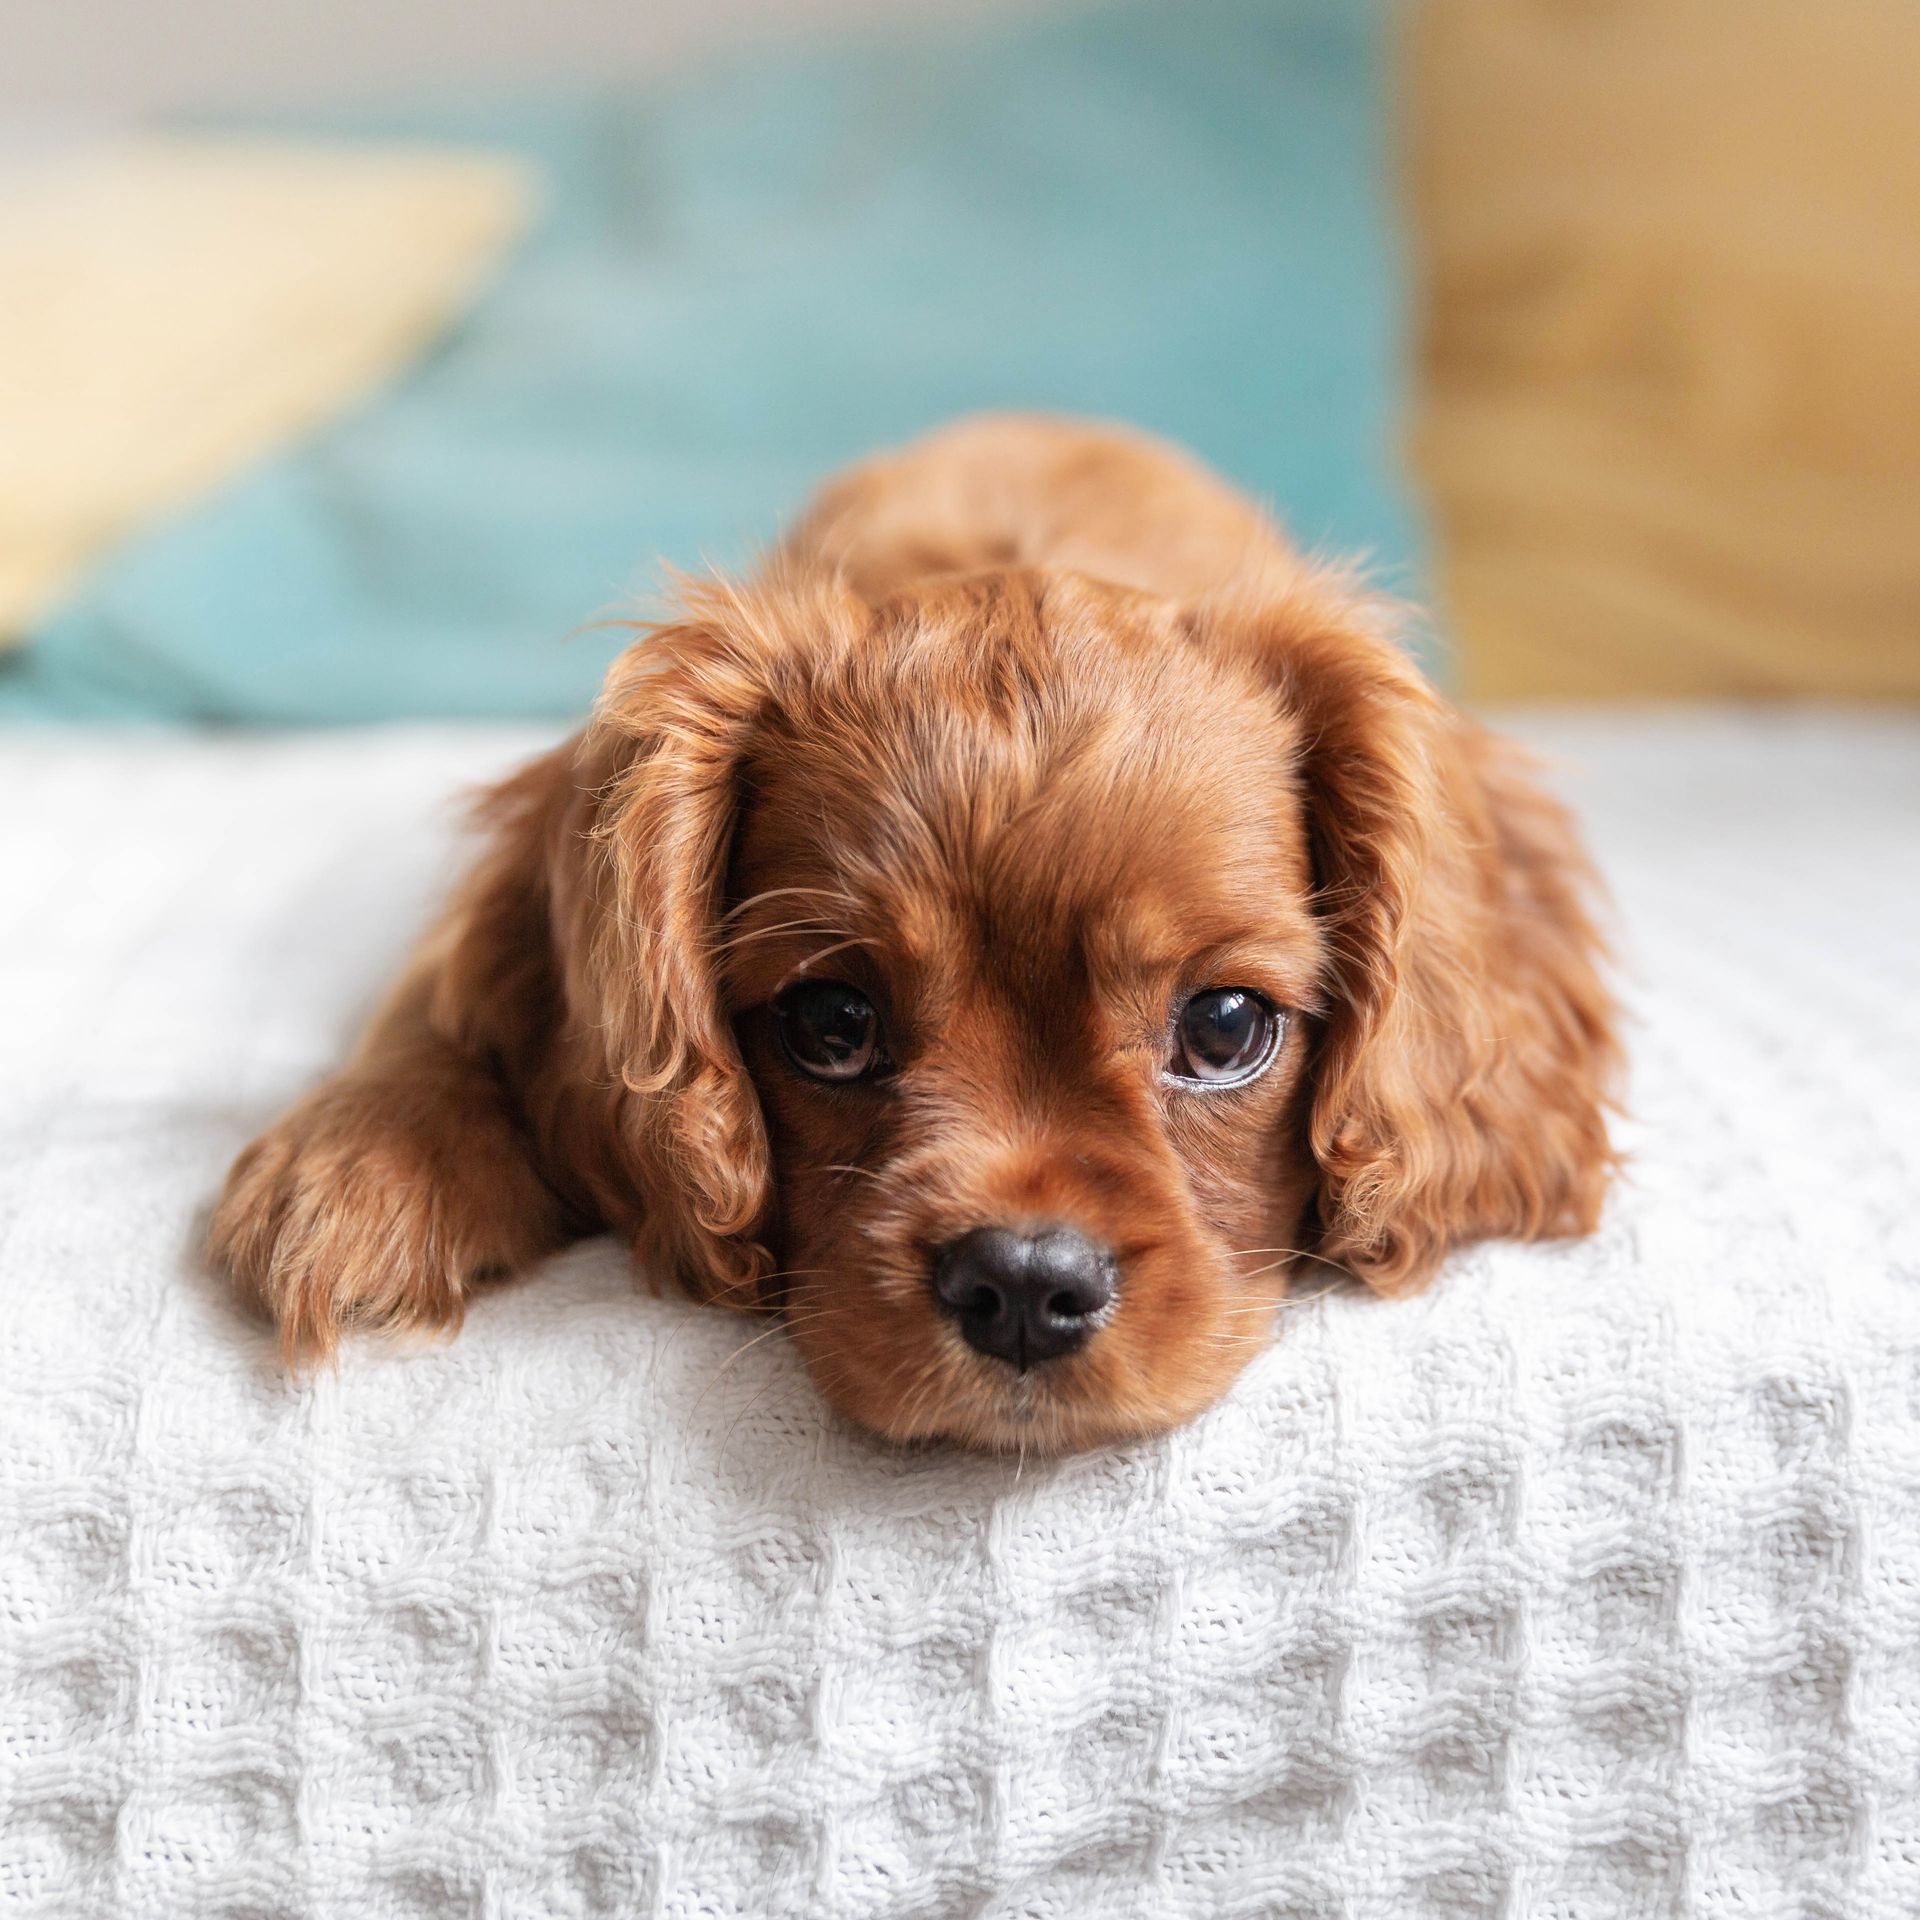 A brown puppy is laying on a bed looking at the camera.